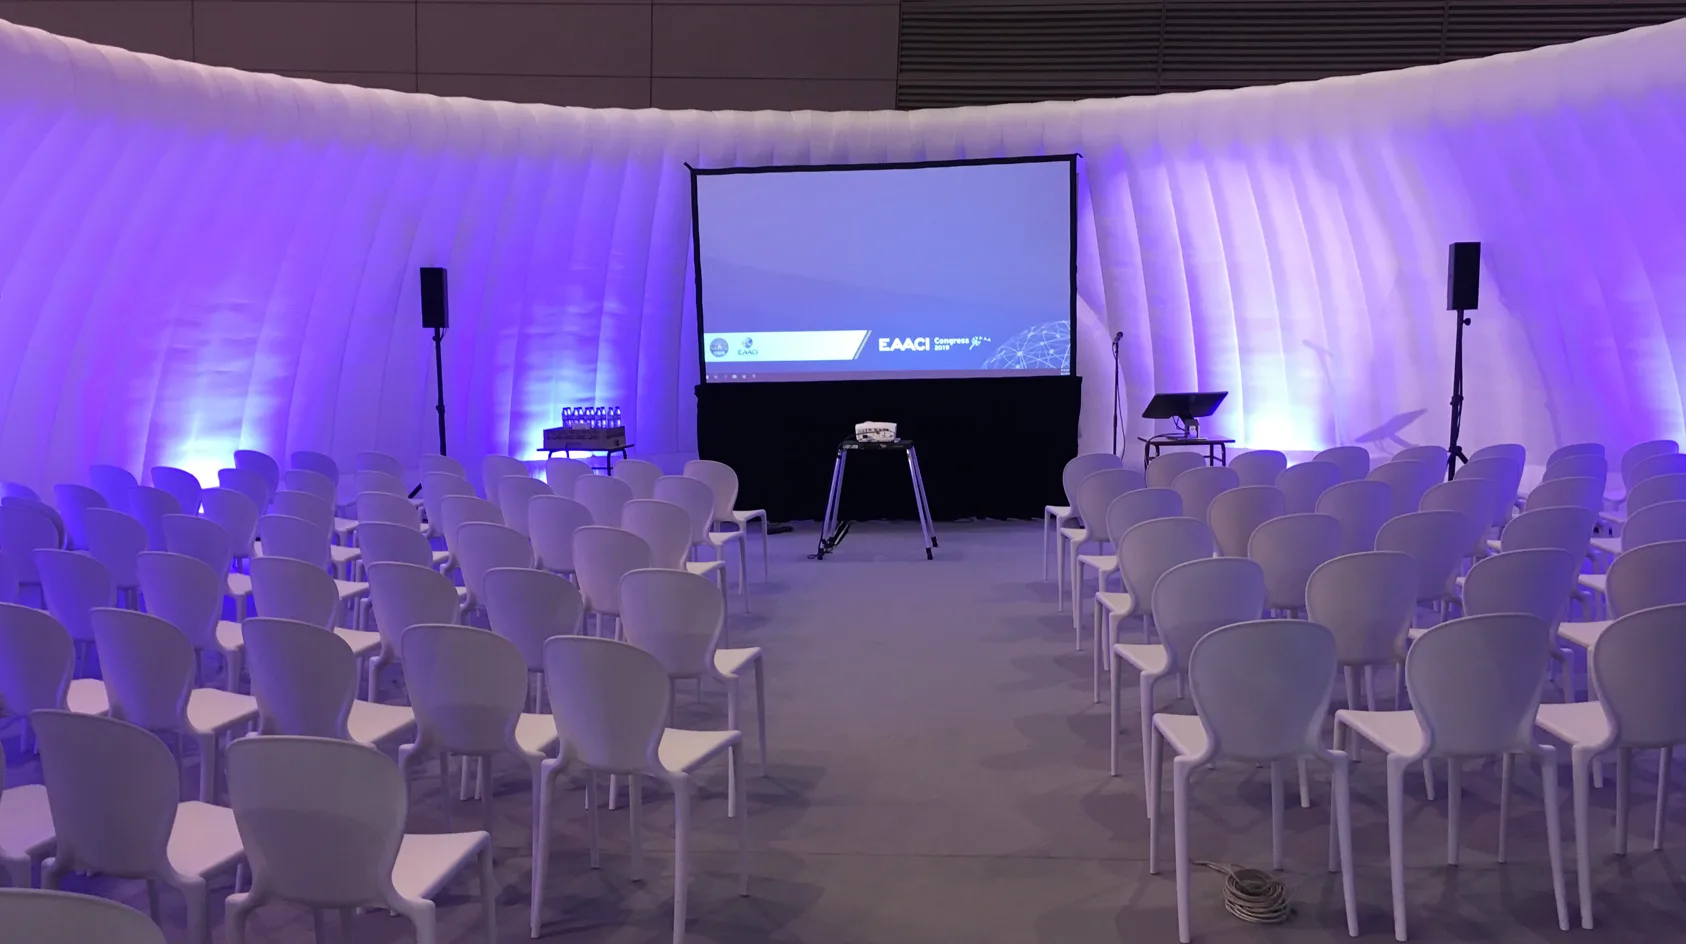 Pic showing the inside of a Created By Air Panoramic event structure set up with seminar style seating